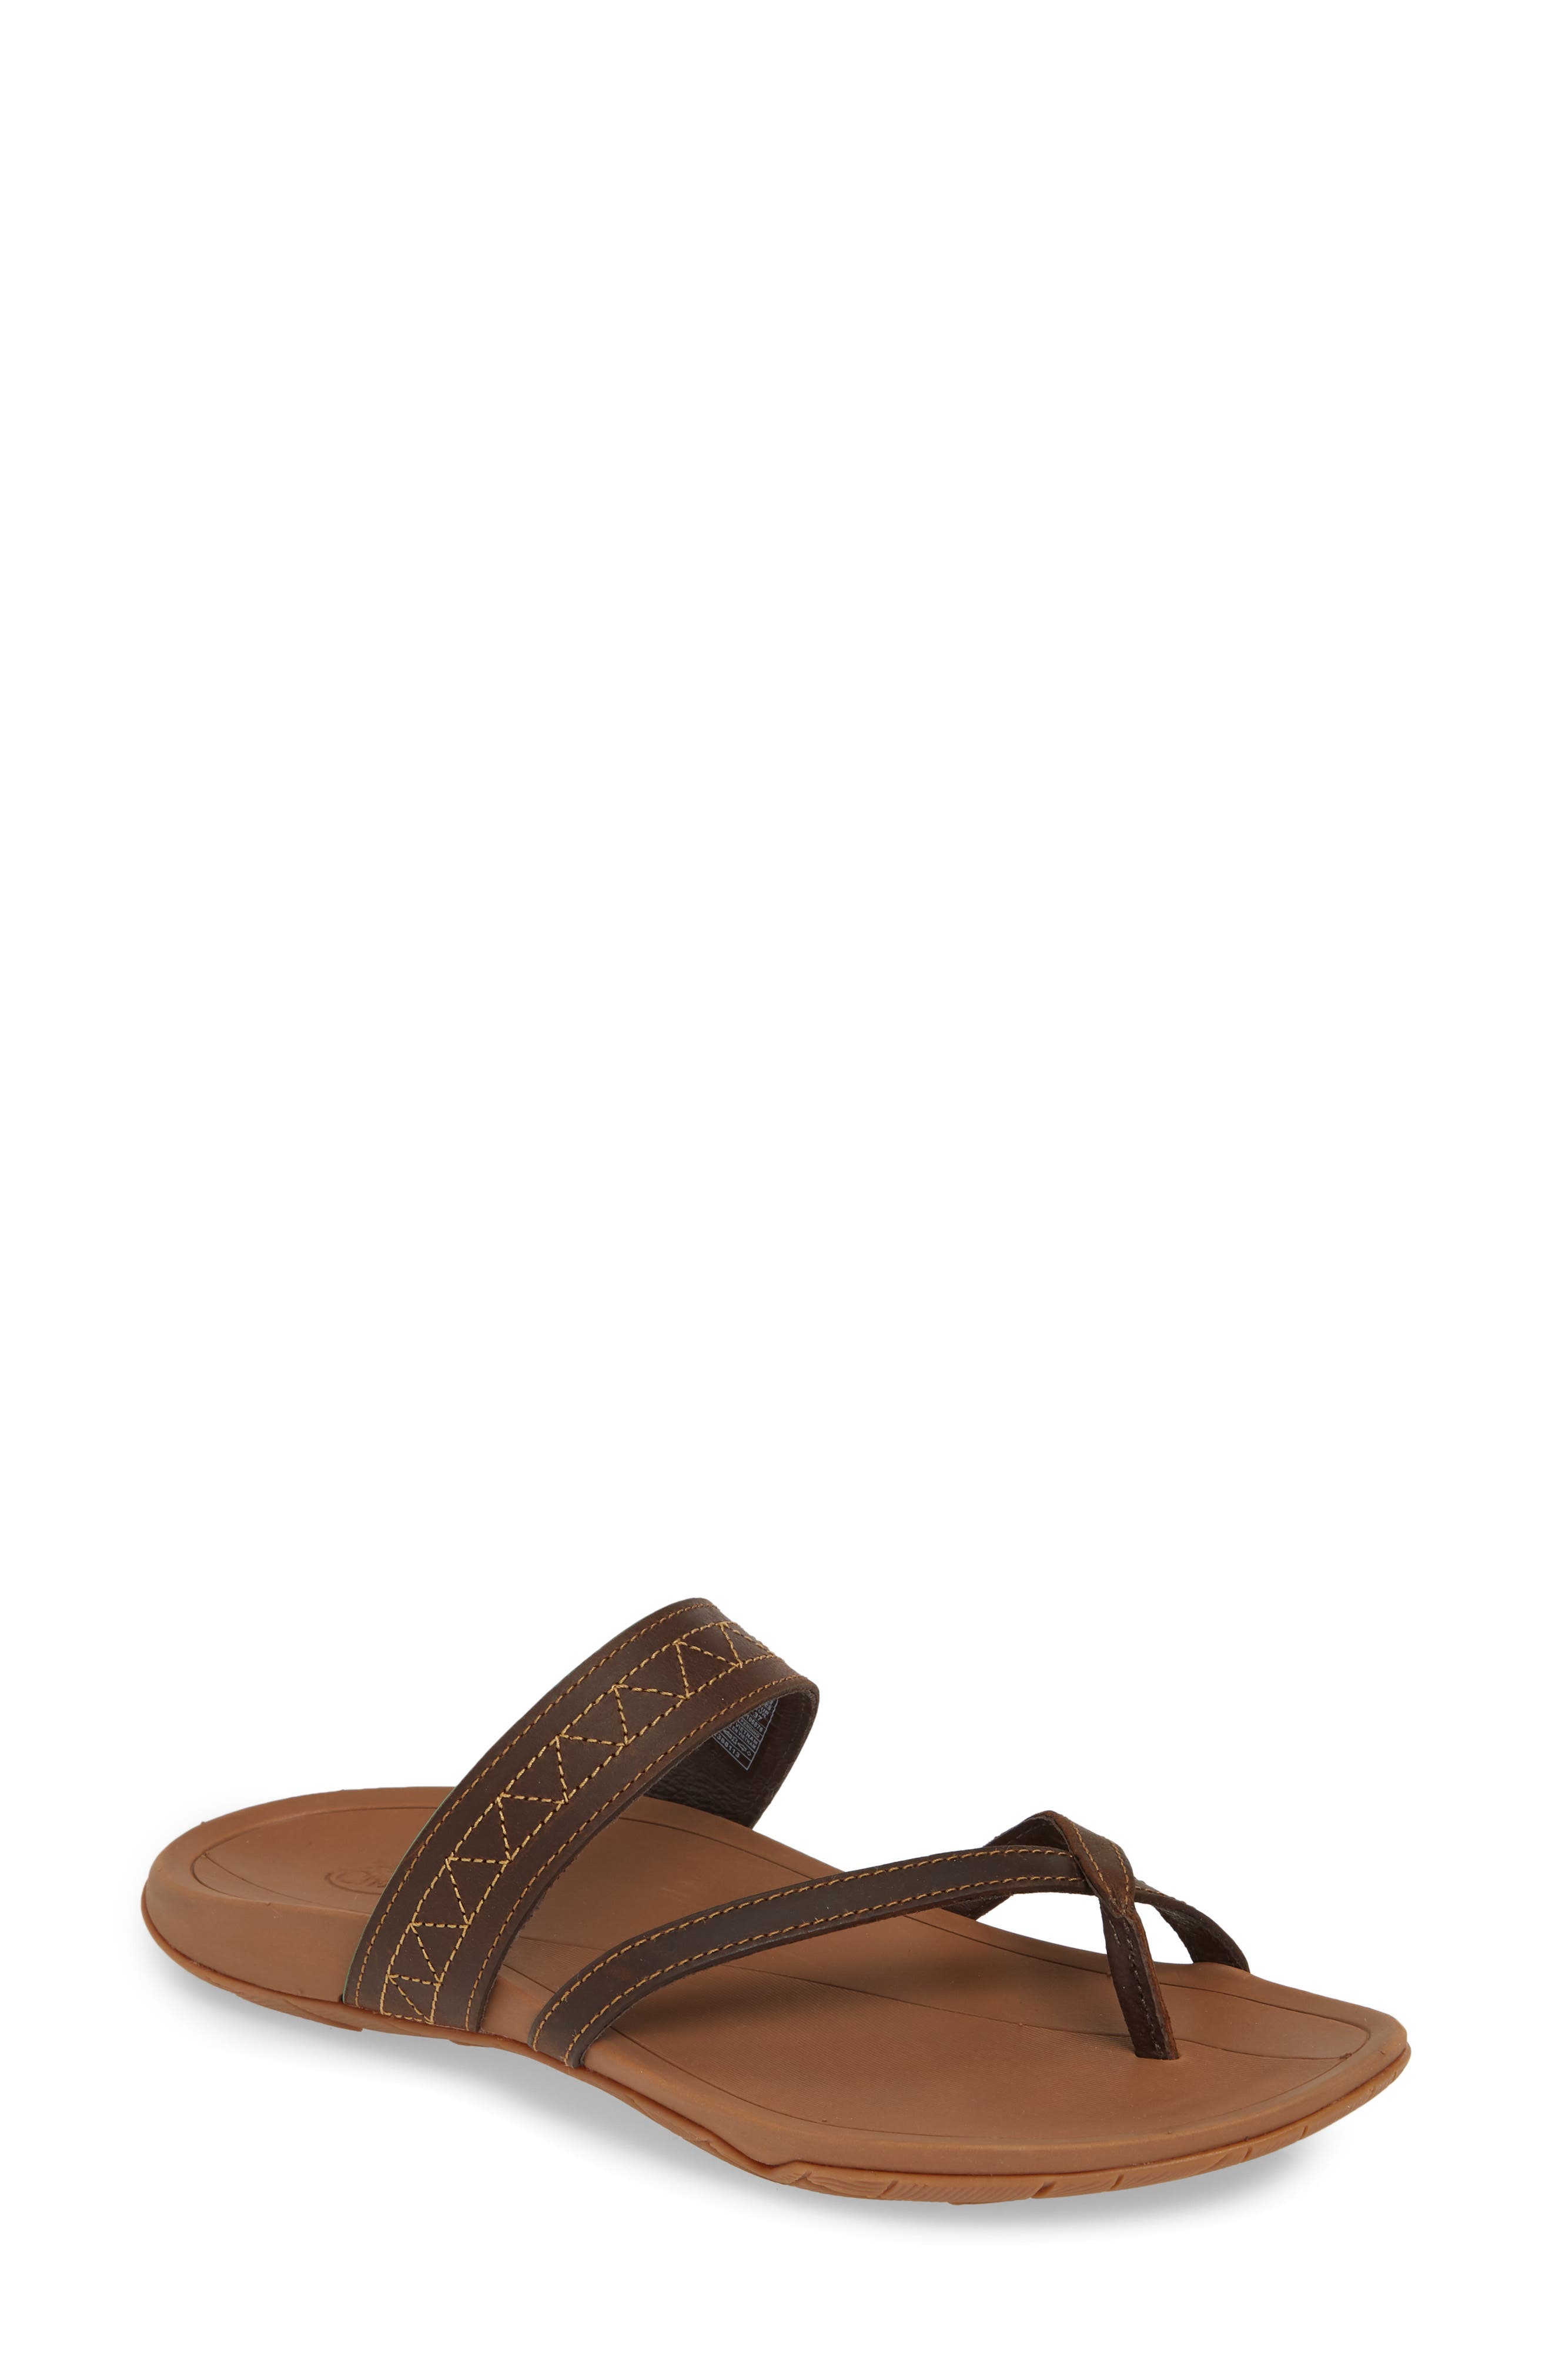 chaco mules